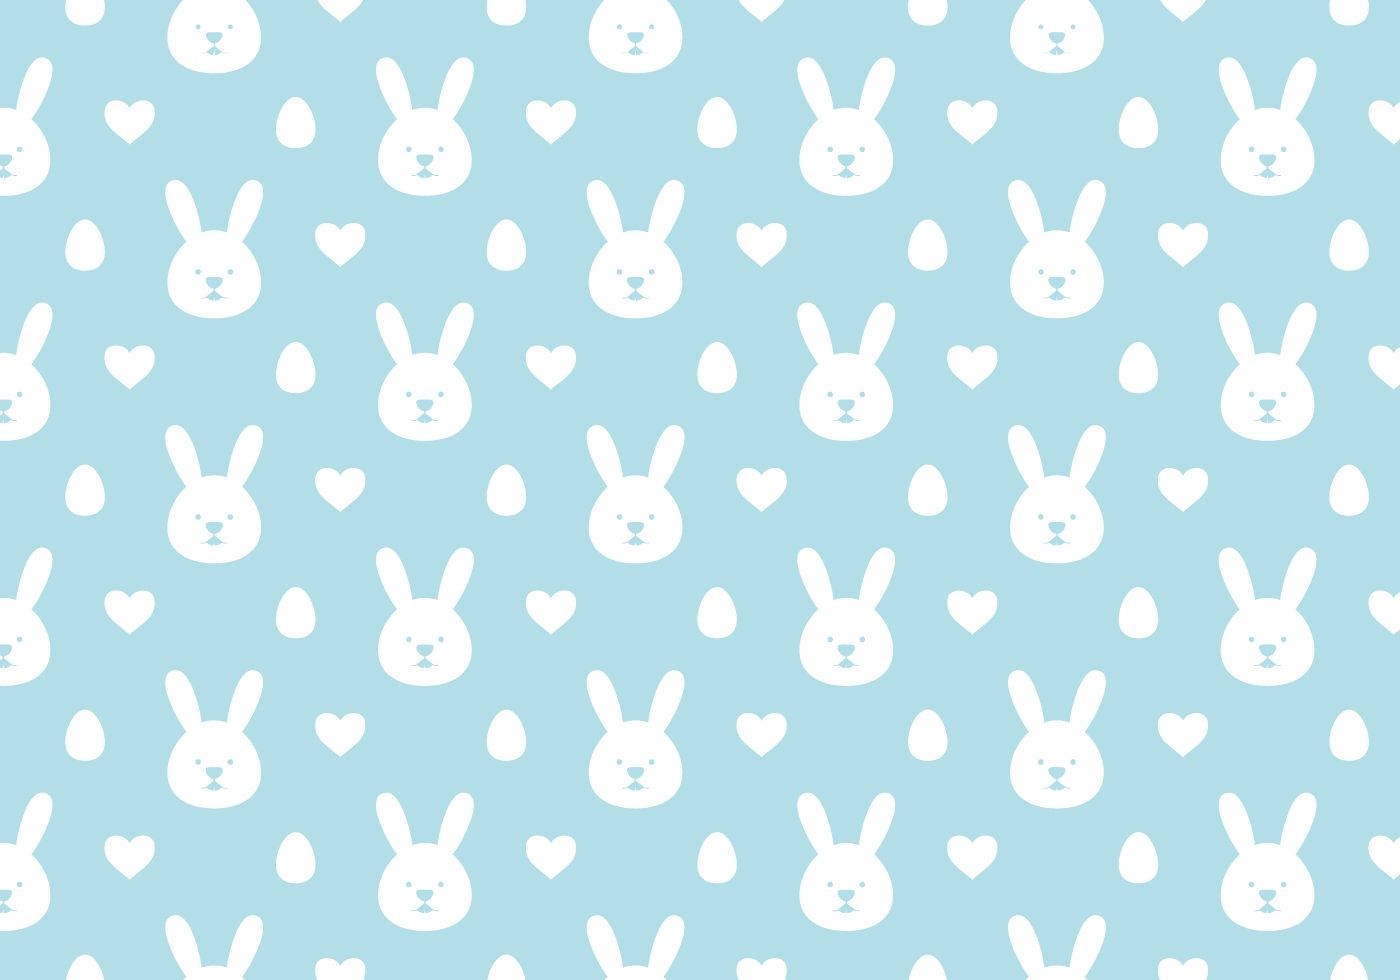 Cute Bunny Patterns With Little Hearts Background